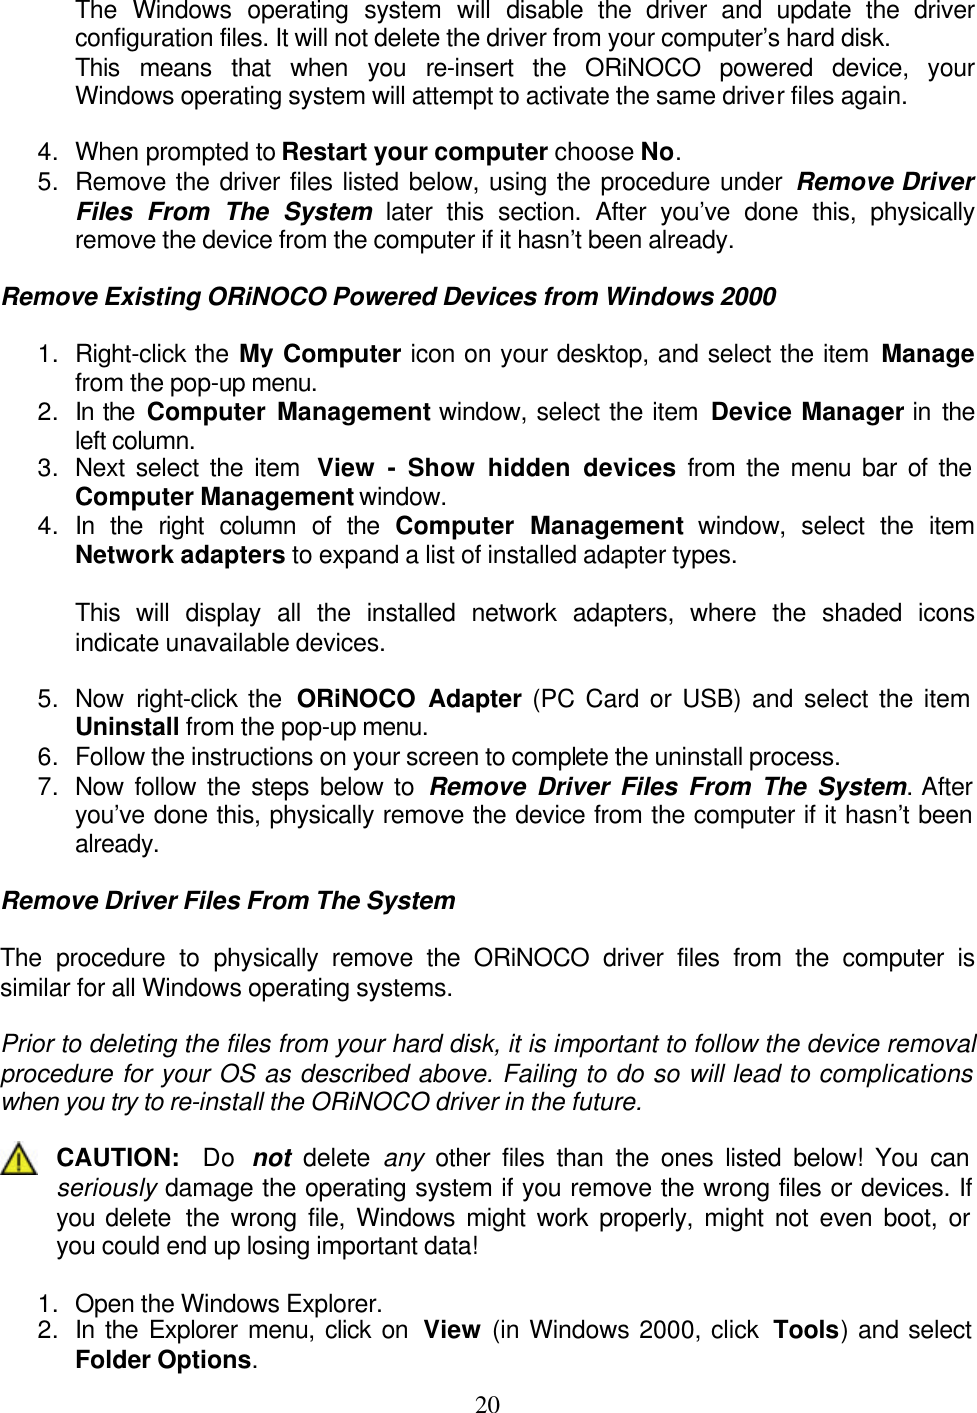    20The Windows operating system will disable the driver and update the driver configuration files. It will not delete the driver from your computer’s hard disk. This means that when you re-insert the ORiNOCO powered device, your Windows operating system will attempt to activate the same driver files again.  4. When prompted to Restart your computer choose No. 5. Remove the driver files listed below, using the procedure under Remove Driver Files From The System later this section. After you’ve done this, physically remove the device from the computer if it hasn’t been already.  Remove Existing ORiNOCO Powered Devices from Windows 2000  1. Right-click the My Computer icon on your desktop, and select the item Manage from the pop-up menu. 2. In the Computer Management window, select the item Device Manager in the left column. 3. Next select the item  View  - Show hidden devices from the menu bar of the Computer Management window. 4. In the right column of the Computer Management window, select the item Network adapters to expand a list of installed adapter types.  This will display all the installed network adapters, where the shaded icons indicate unavailable devices.  5. Now right-click the  ORiNOCO Adapter (PC Card or USB) and select the item Uninstall from the pop-up menu. 6. Follow the instructions on your screen to complete the uninstall process. 7. Now follow the steps below to Remove Driver Files From The System. After you’ve done this, physically remove the device from the computer if it hasn’t been already.  Remove Driver Files From The System  The procedure to physically remove the ORiNOCO driver files from the computer is similar for all Windows operating systems.  Prior to deleting the files from your hard disk, it is important to follow the device removal procedure for your OS as described above. Failing to do so will lead to complications when you try to re-install the ORiNOCO driver in the future.  CAUTION:  Do  not  delete  any other files than the ones listed below! You can seriously damage the operating system if you remove the wrong files or devices. If you delete  the wrong file, Windows might work properly, might not even boot, or you could end up losing important data!  1. Open the Windows Explorer. 2. In the Explorer menu, click on  View (in Windows 2000, click  Tools) and select Folder Options.  